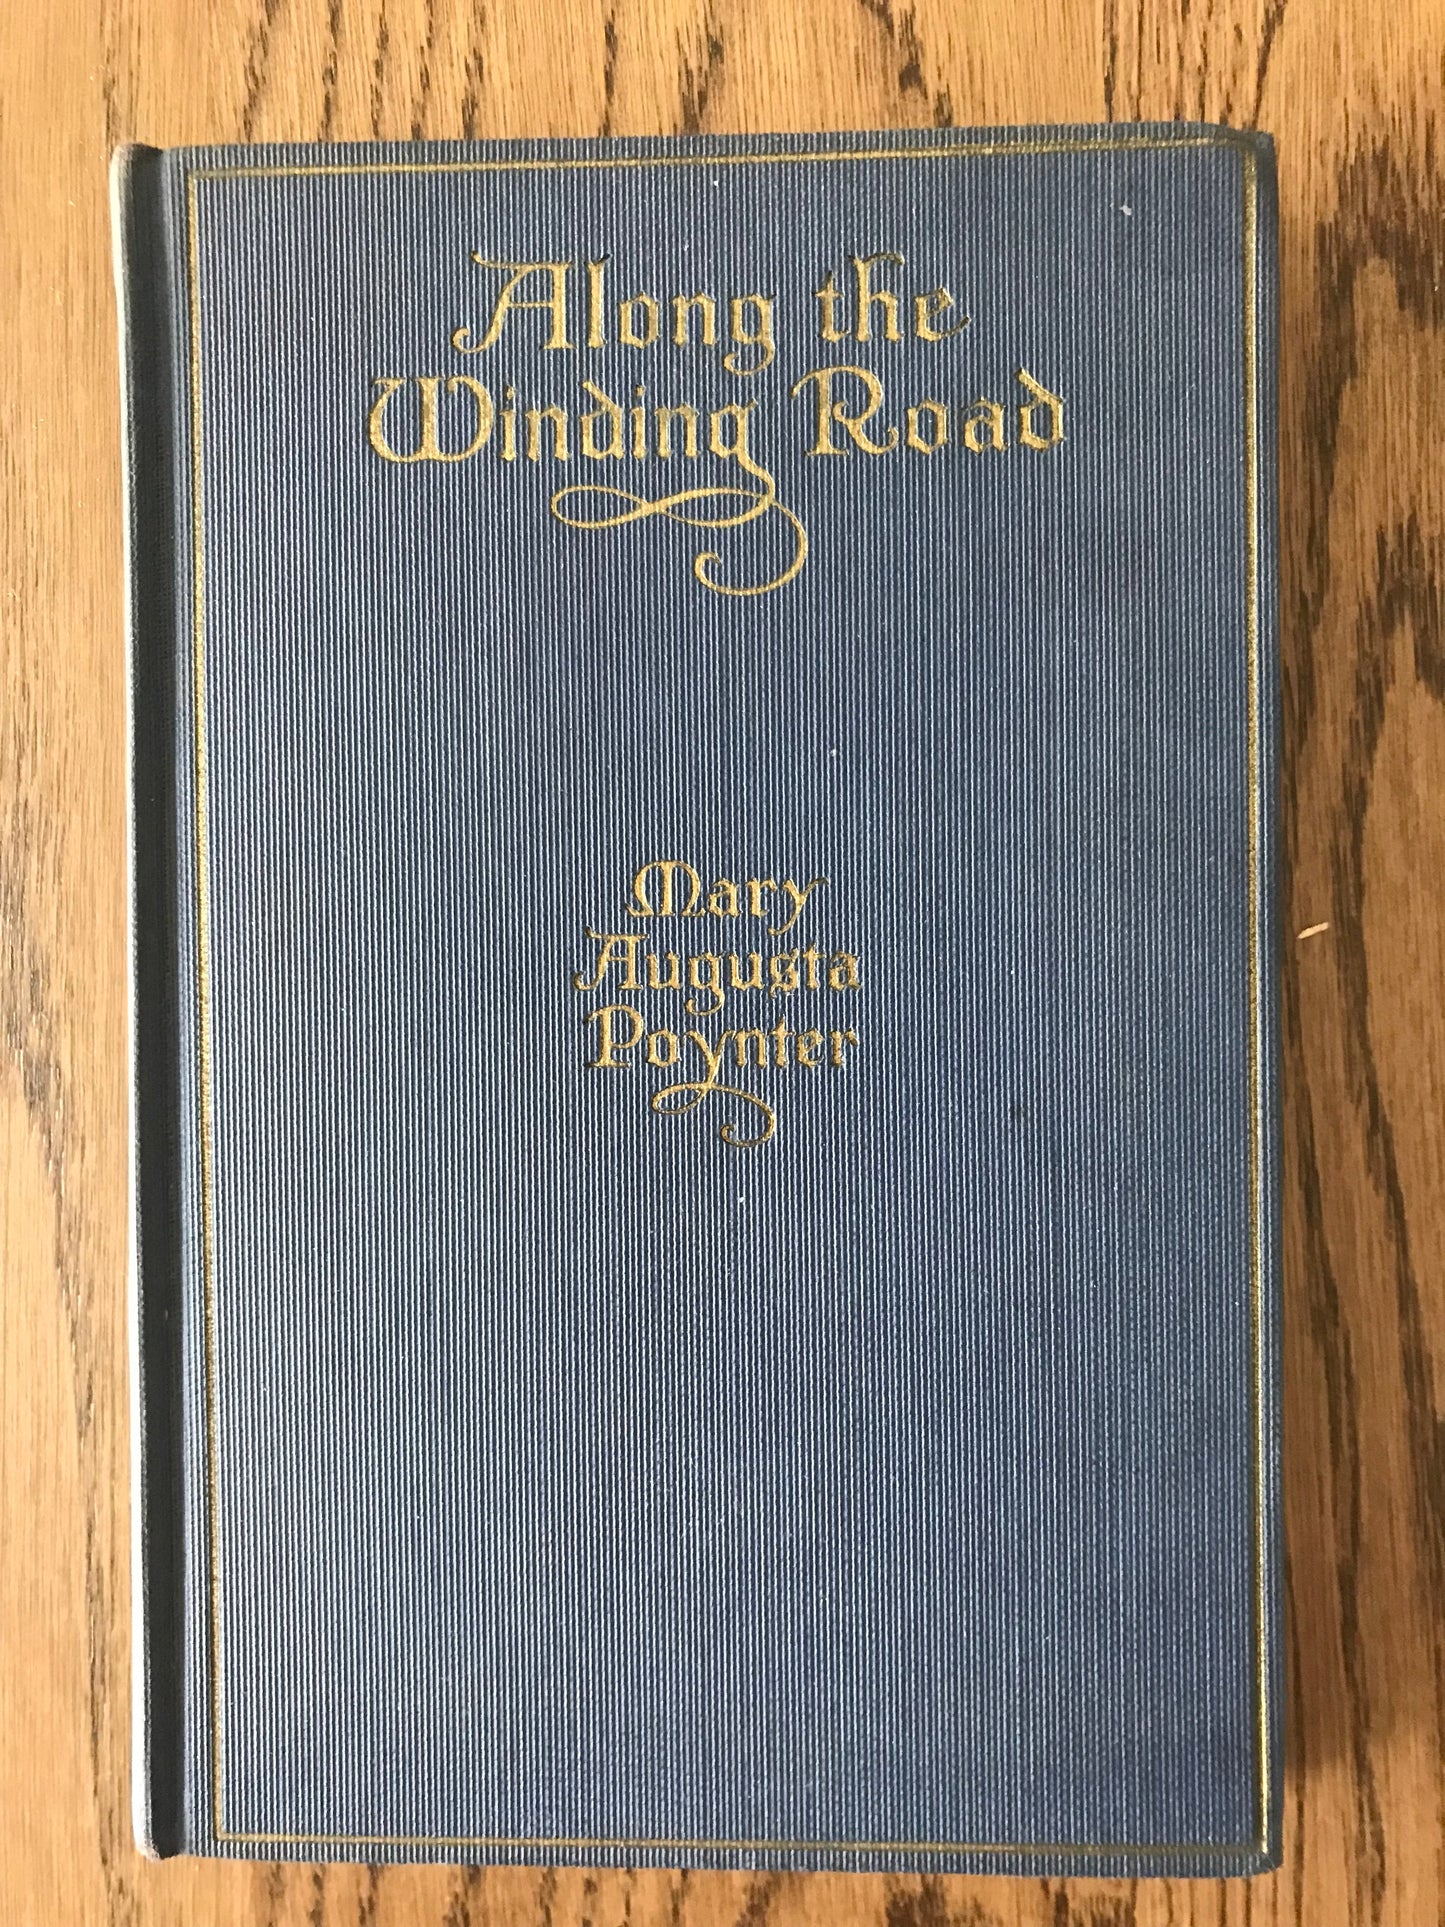 ALONG THE WINDING ROAD - MARY AUGUSTA POYNTER BooksCardsNBikes